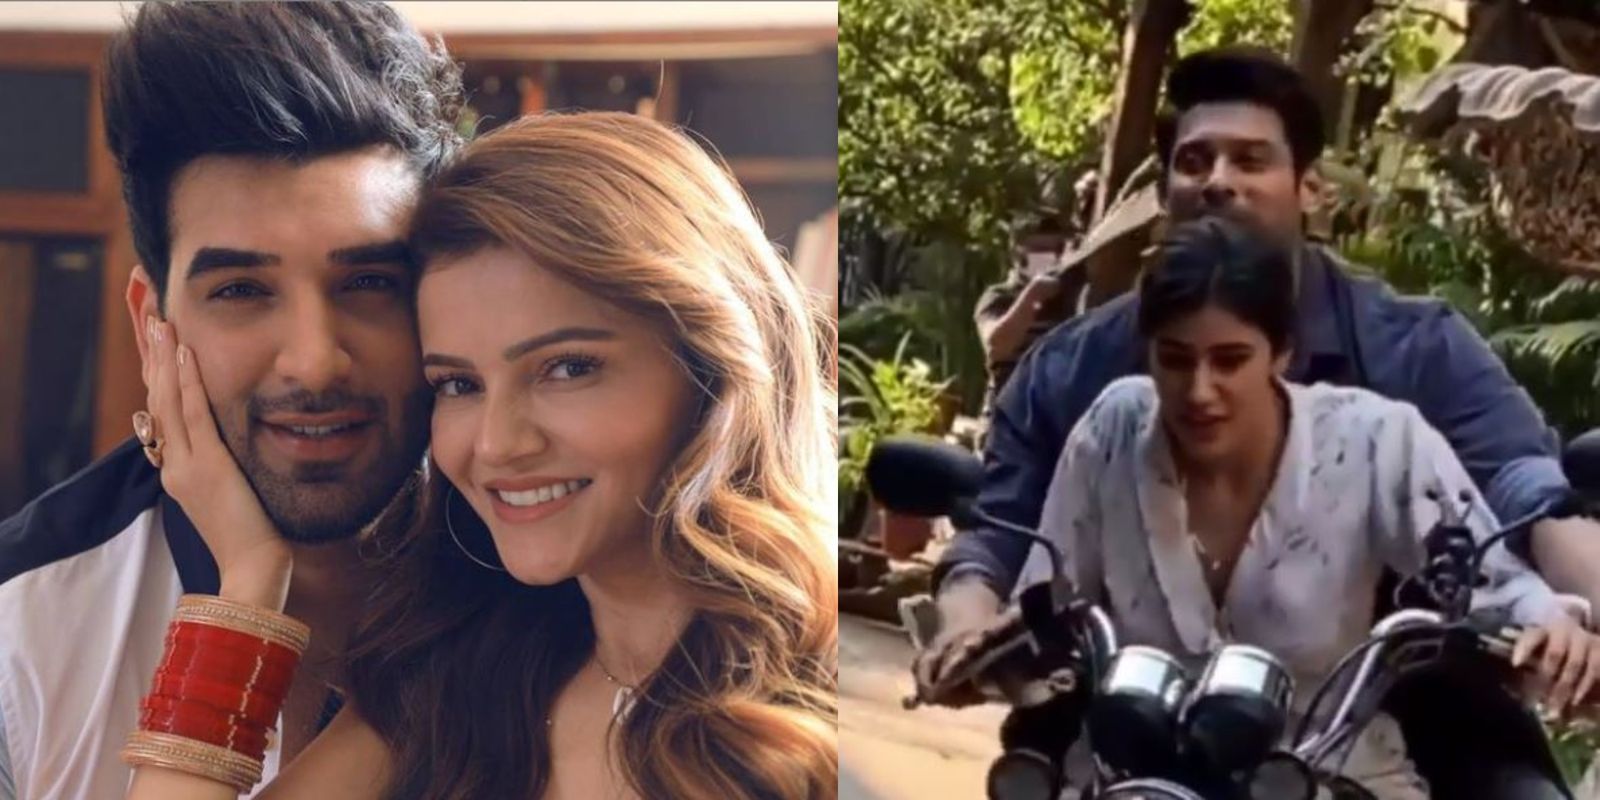 Rubina Dilaik, Paras Chhabra To Come Together For A Music Video; Sidharth Shukla, Sonia Rathee Wrap Up Broken But Beautiful 3